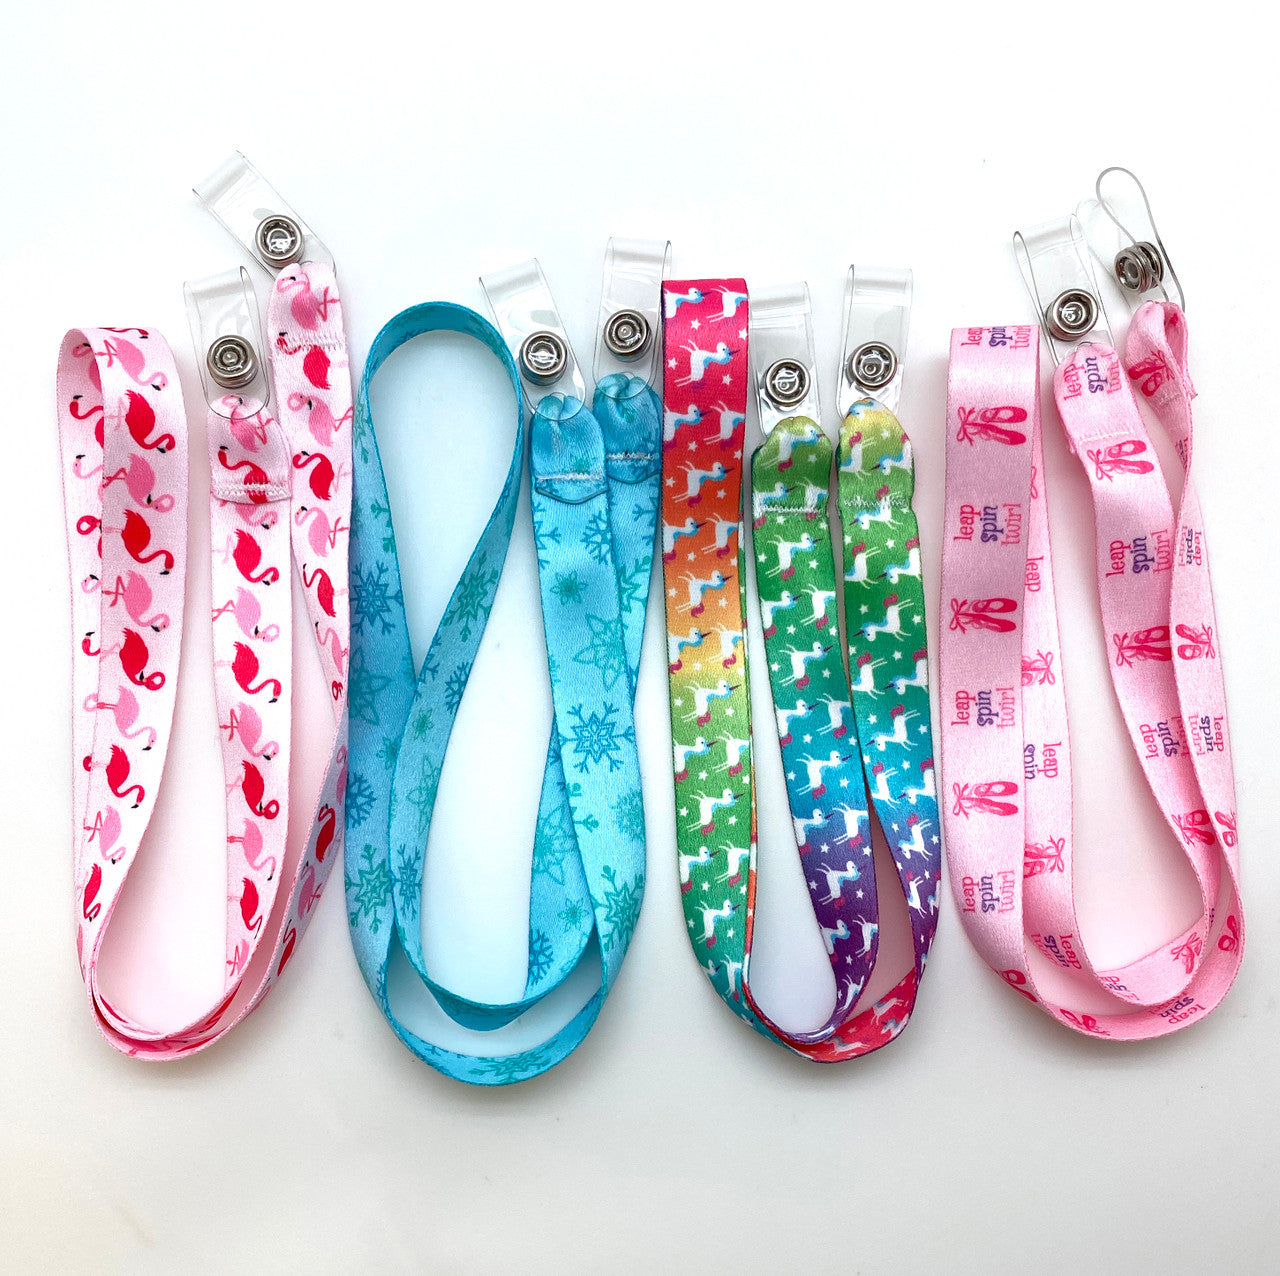 These lanyards are available in four fun designs for girls Choose among Frozen blue snowflakes, Unicorns, Ballet theme, and flamingos.  Never lose a face mask at school, sports practice, on the bus or during lunch again!